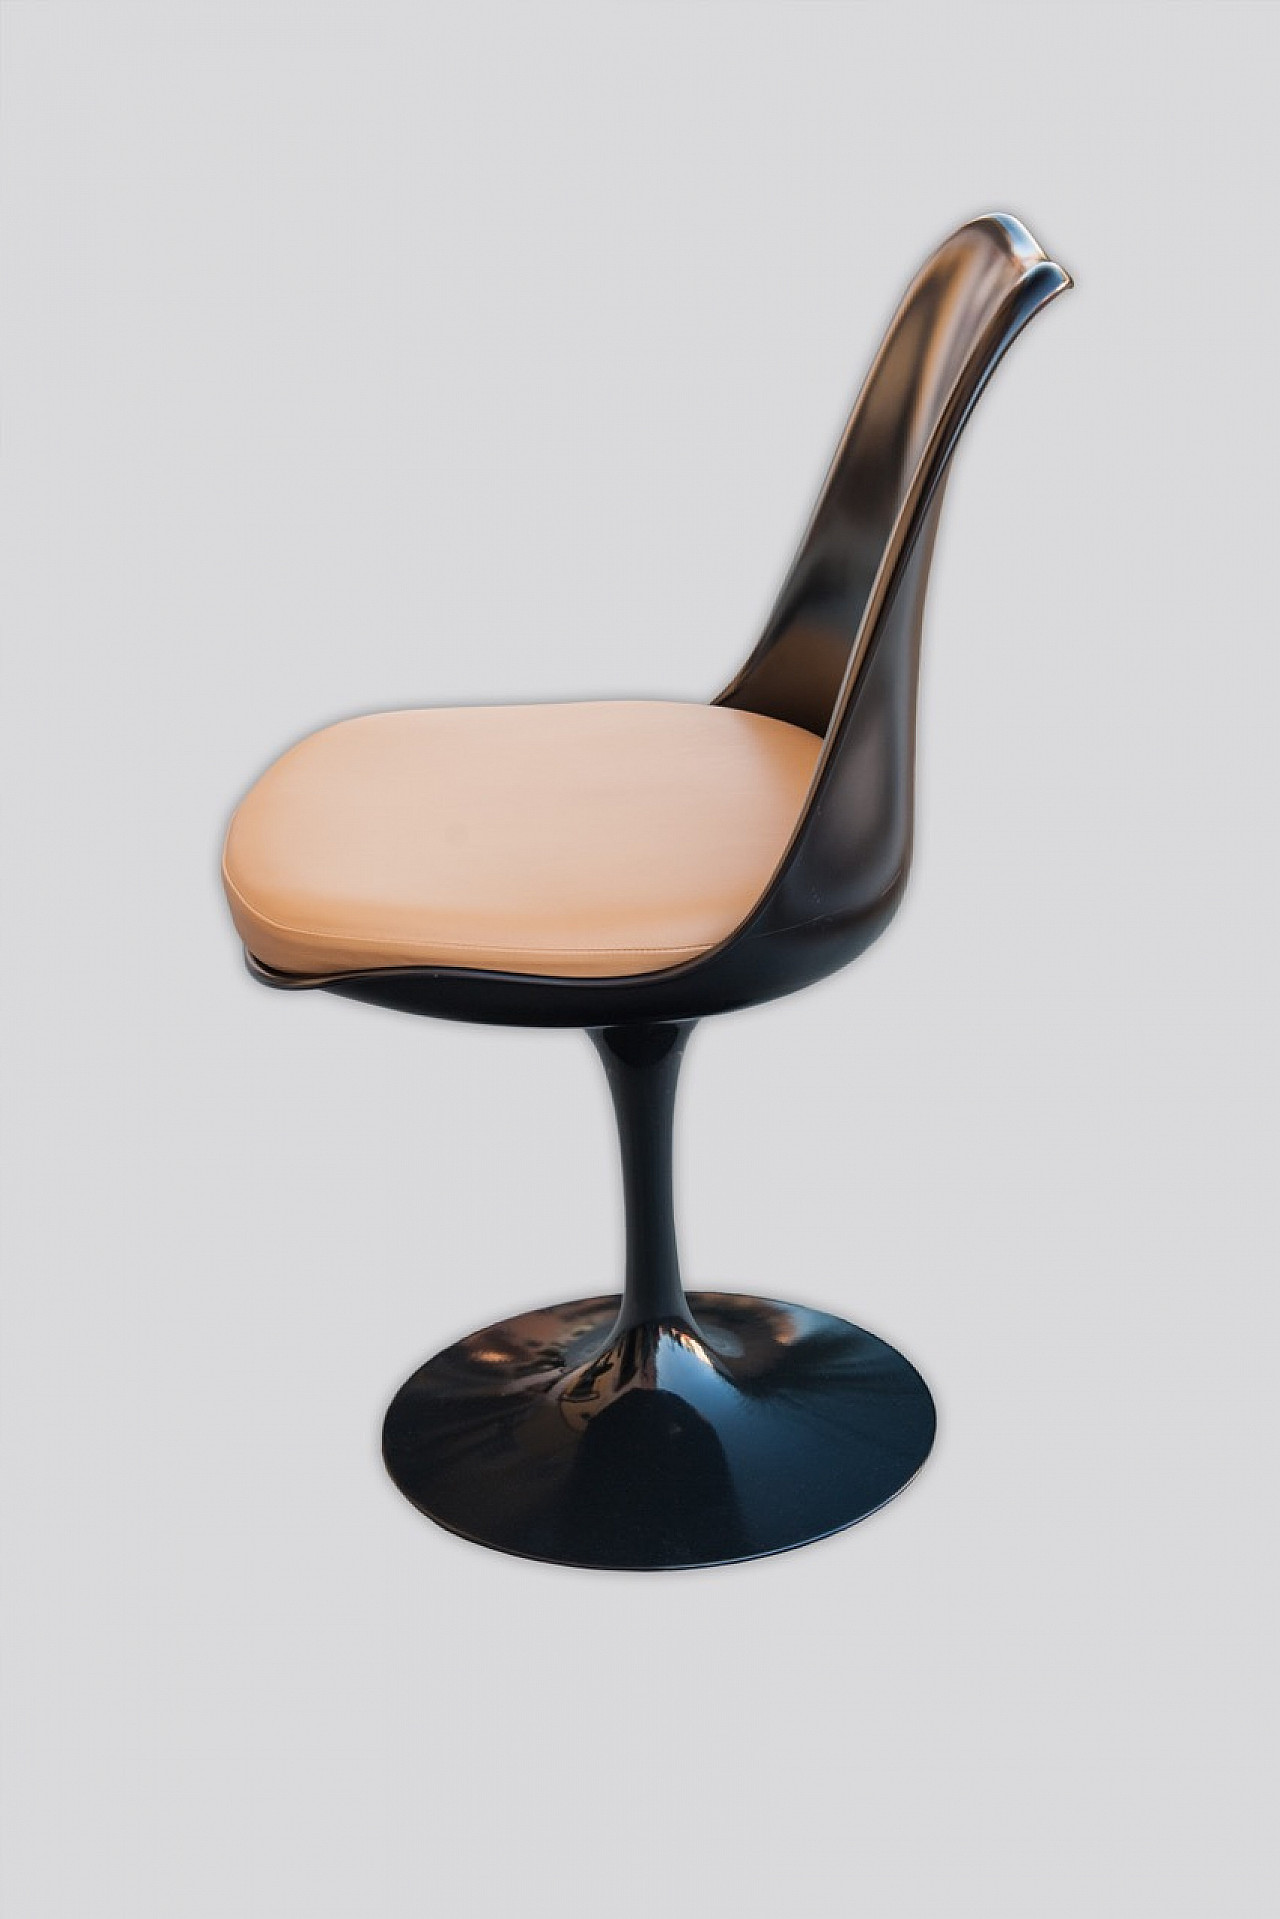 6 "Tulip" black swivel chairs by Eero Sarinen for Knoll 3